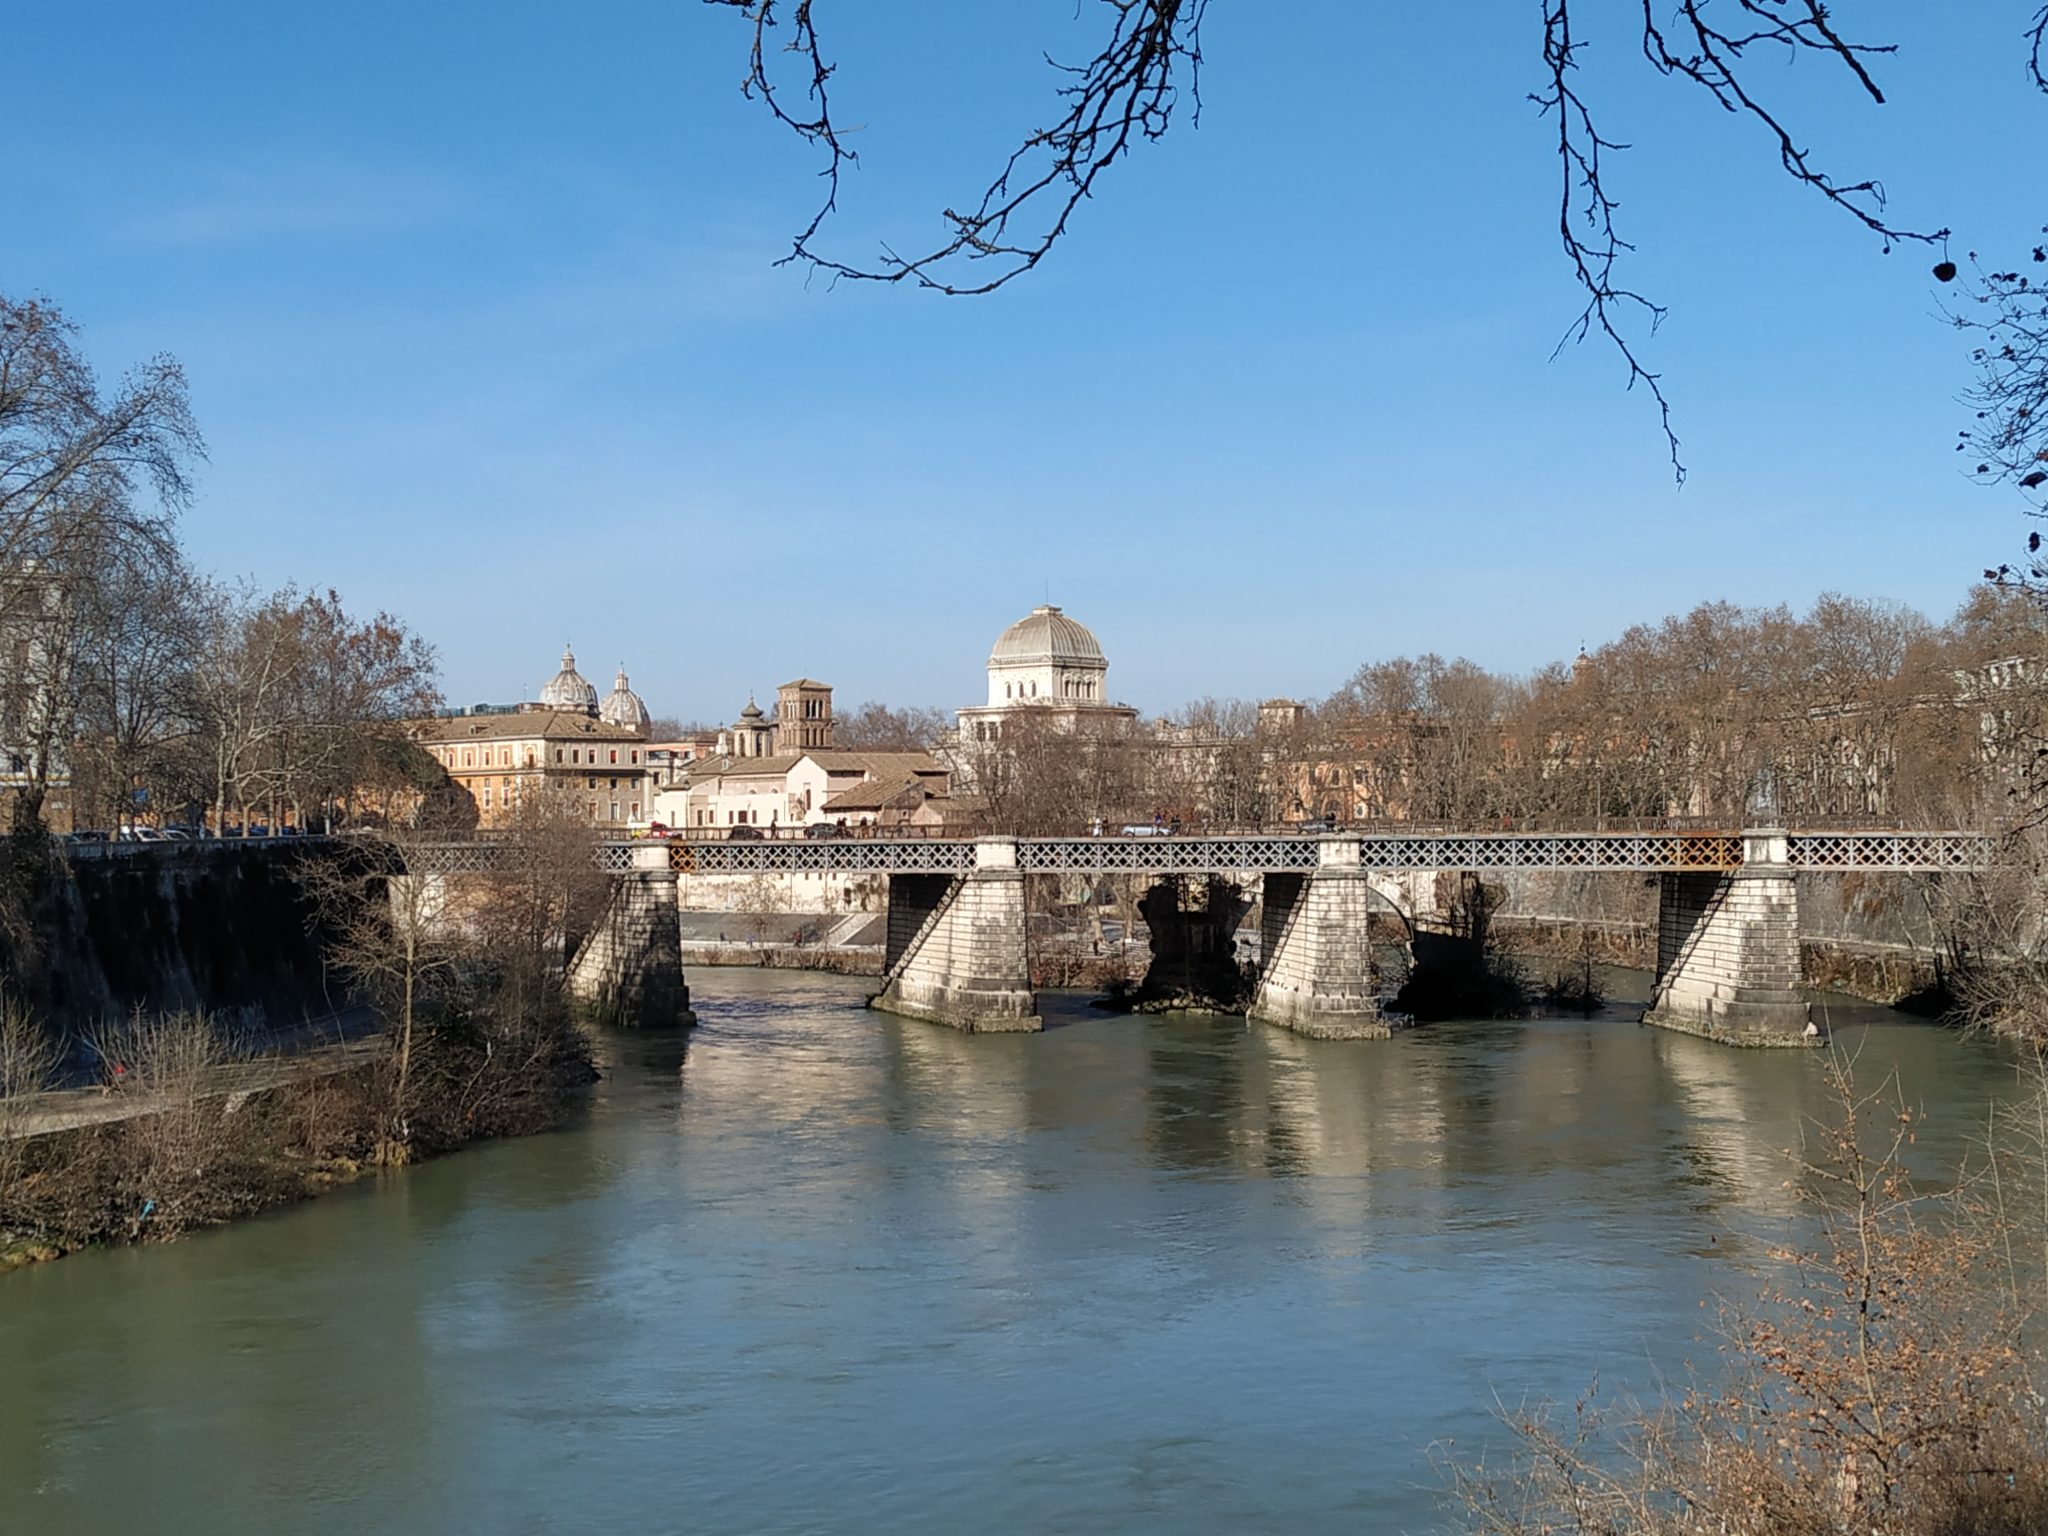 Along the Tiber River in Rome, Italy